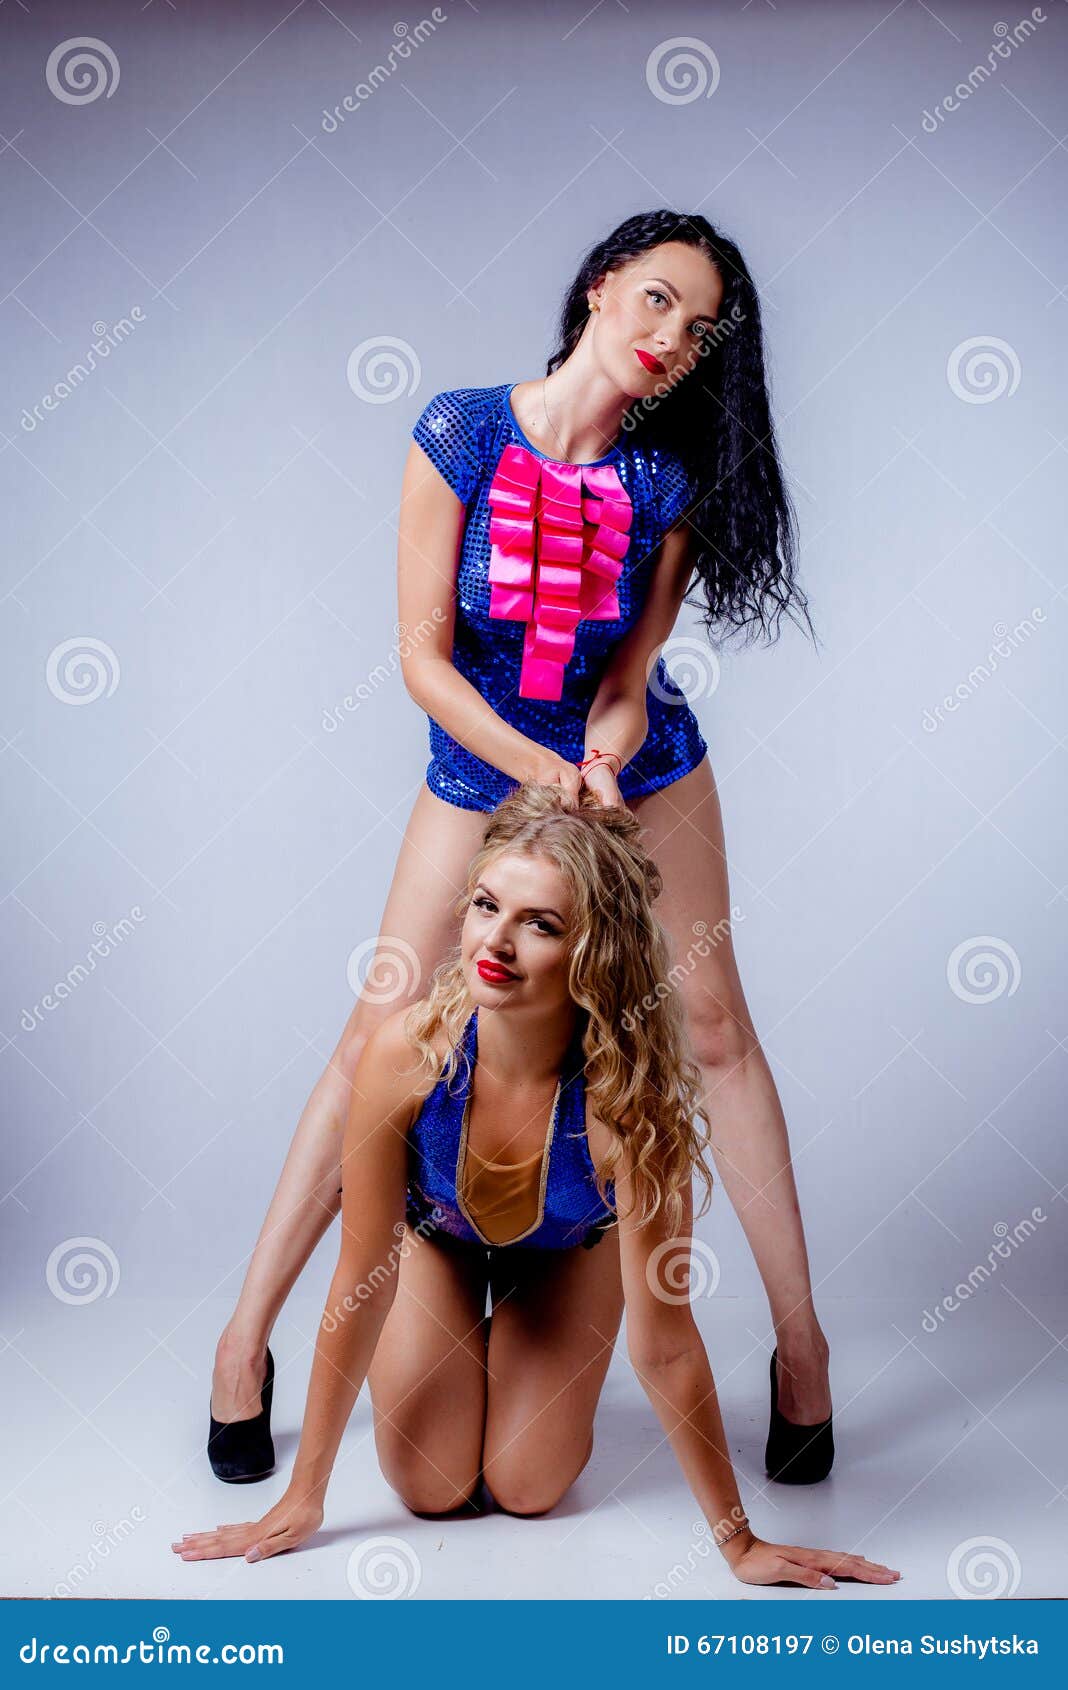 Porn Blonde Brunette White Background - Sexy blonde and brunette - Naked photo